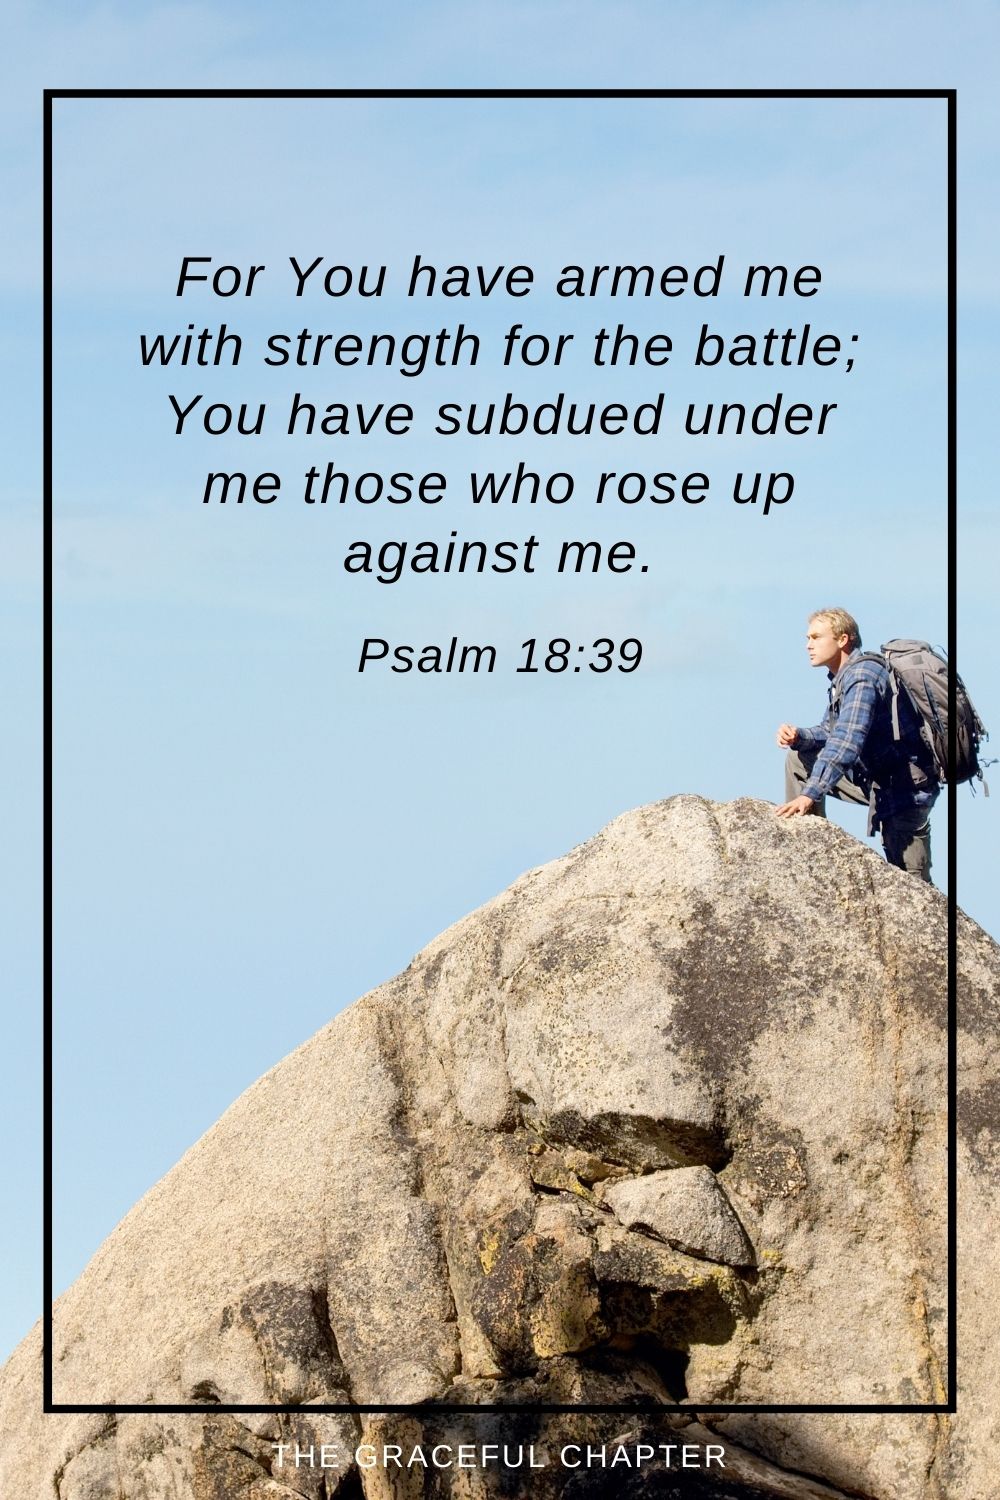 For You have armed me with strength for the battle; You have subdued under me those who rose up against me. Psalm 18:39